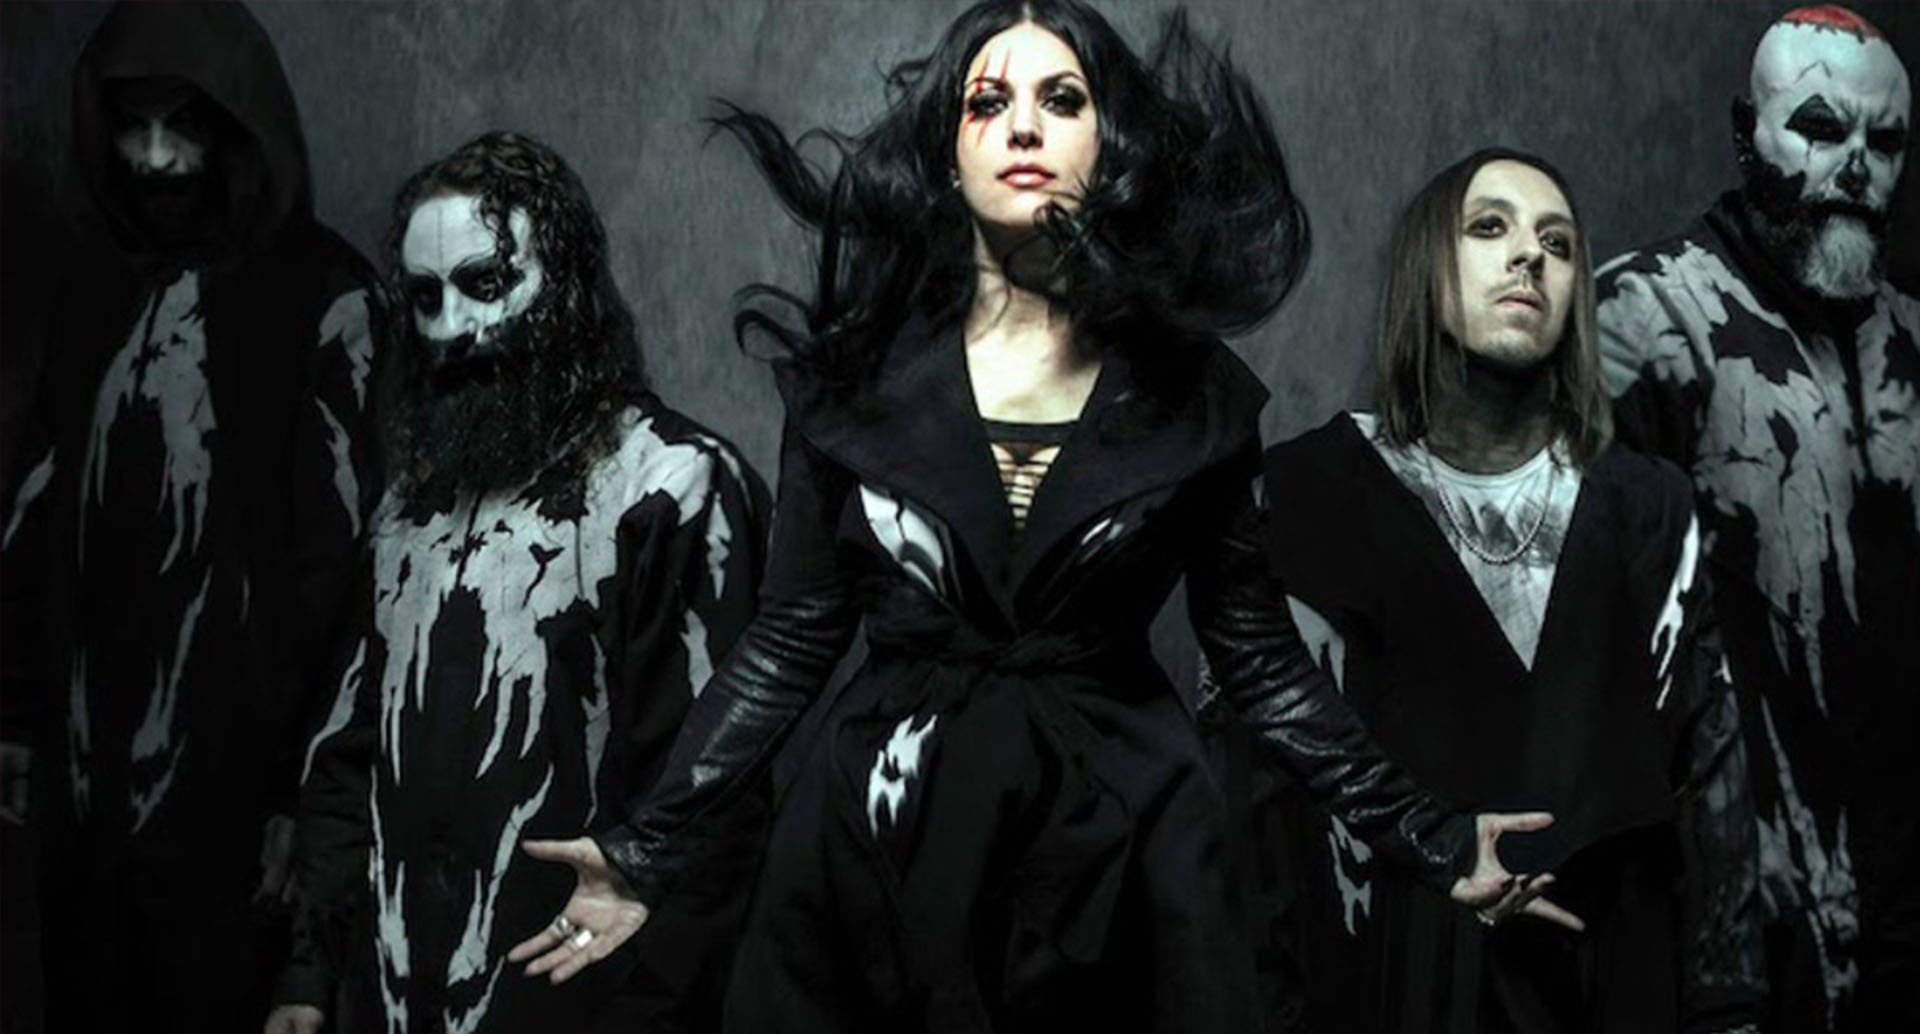  Lacuna Coil cancels South East Asian tour dates due to the COVID-19